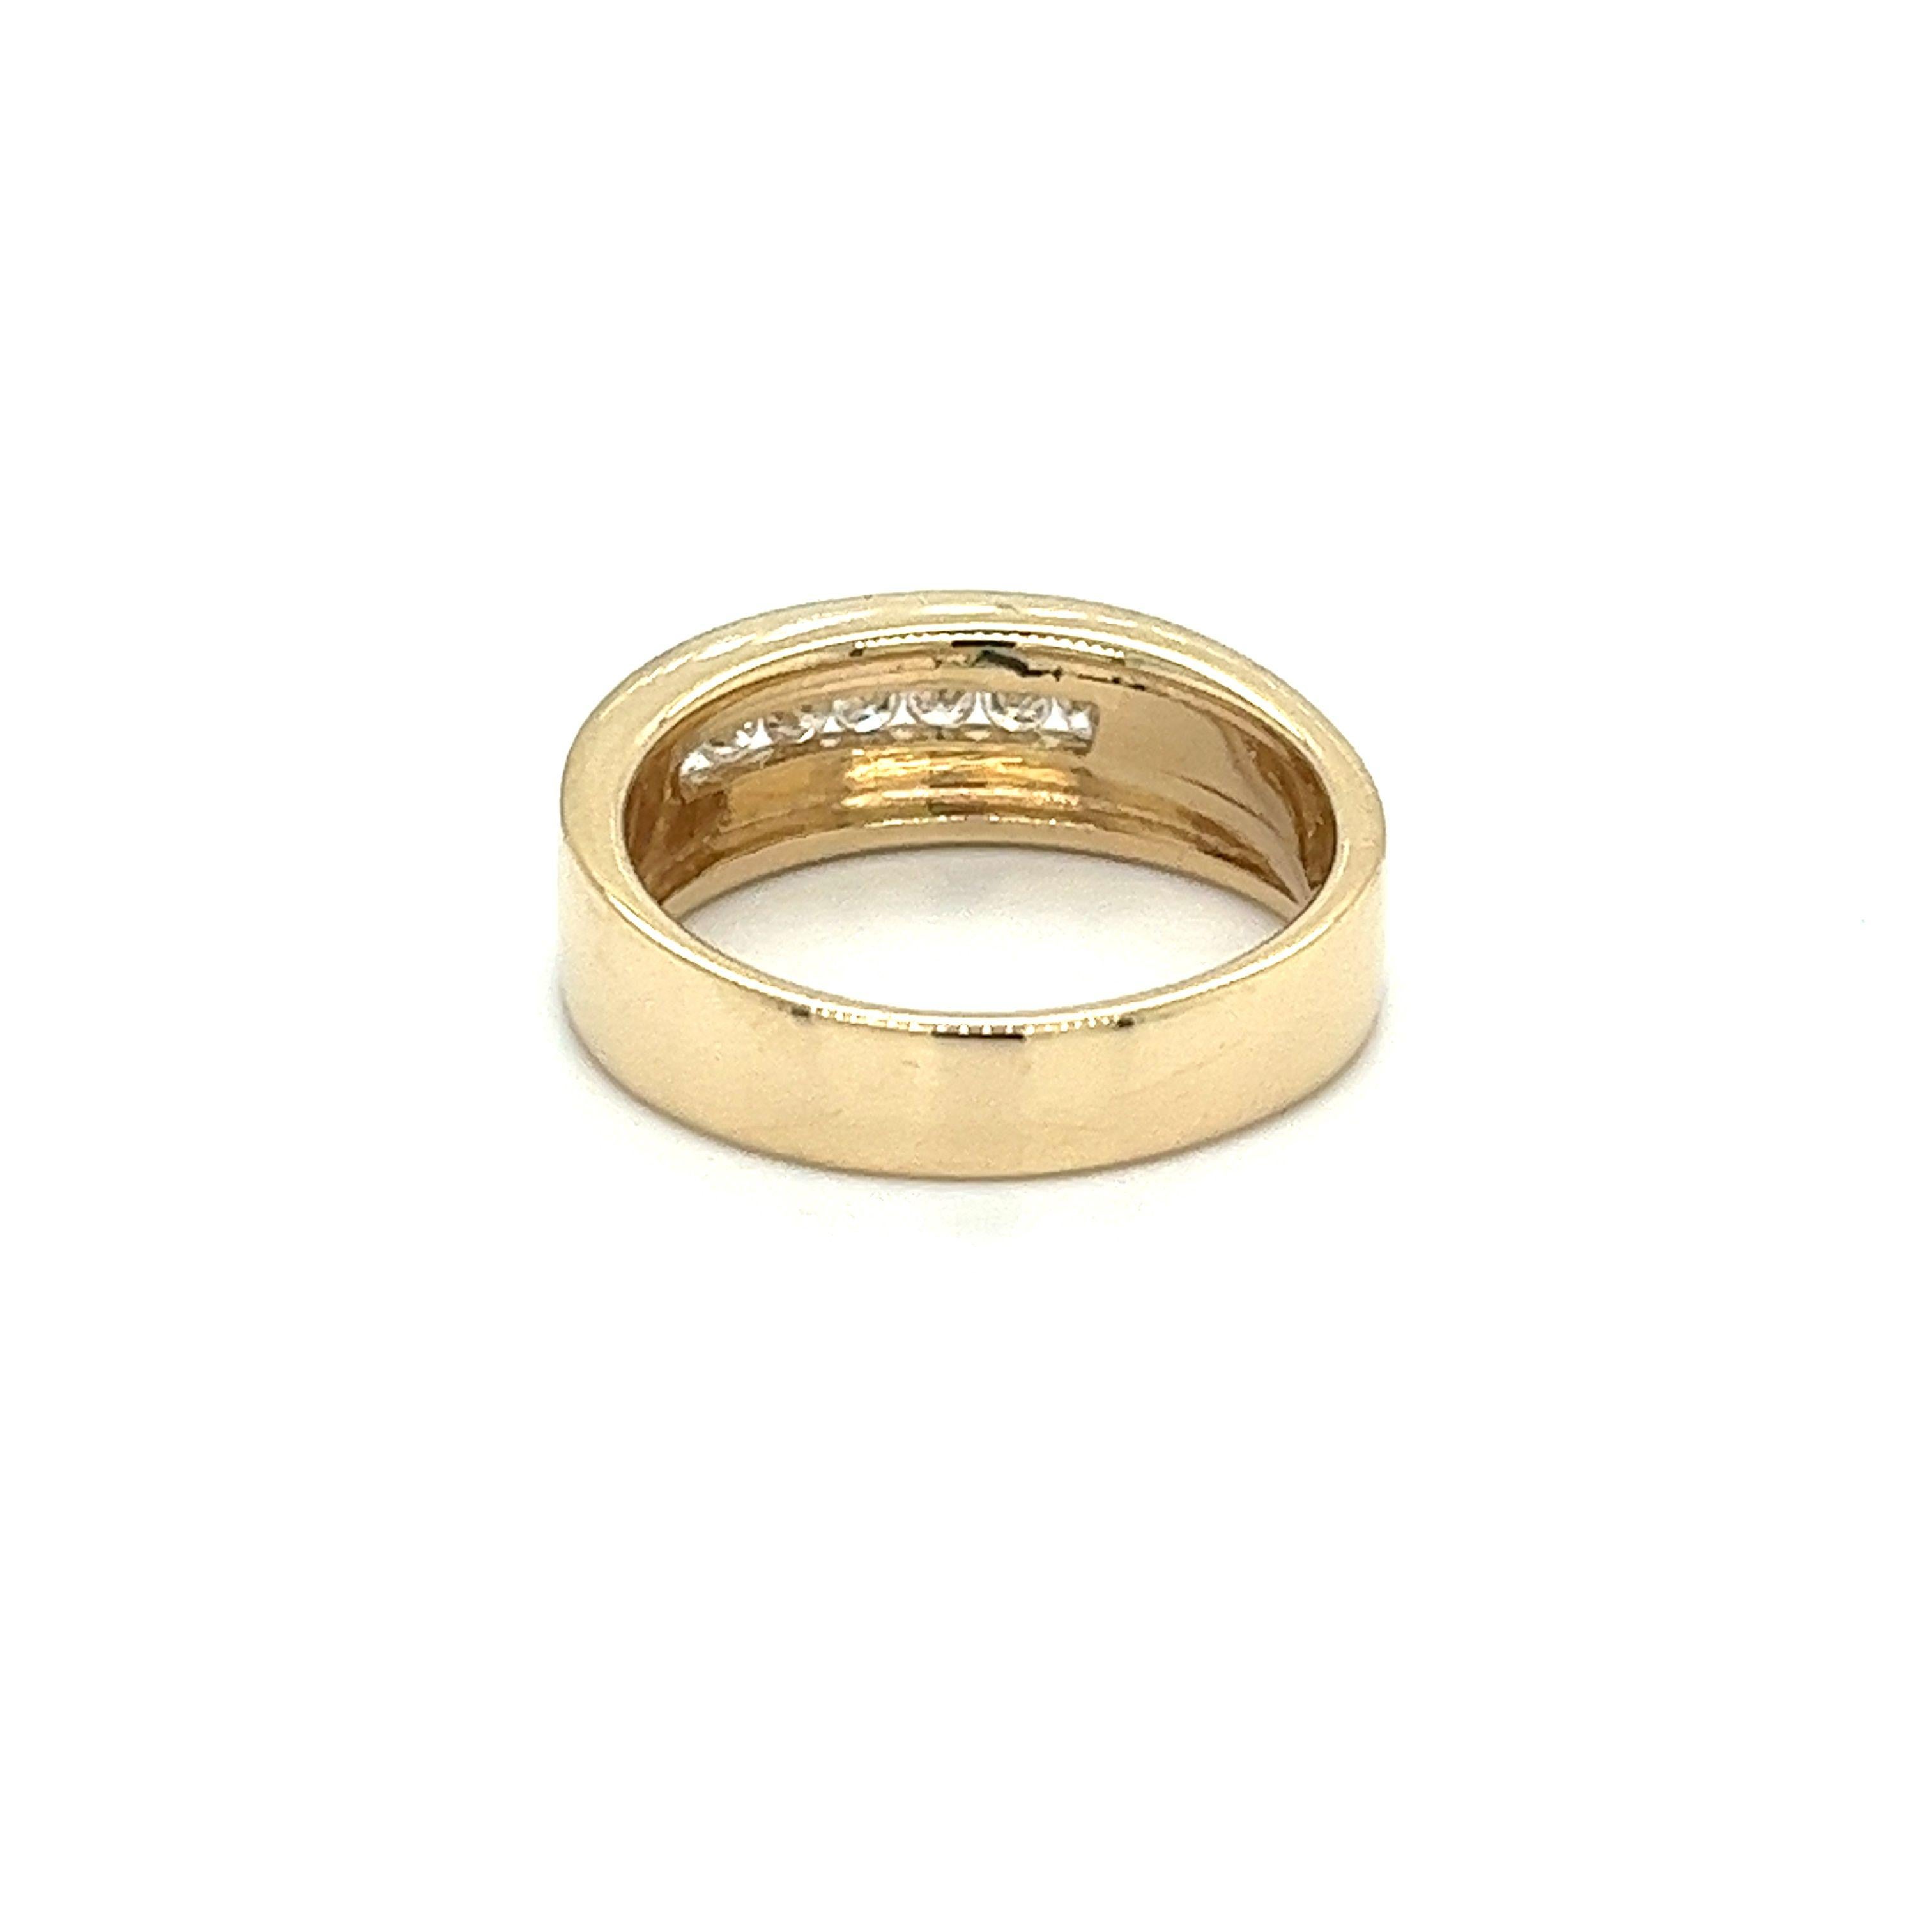 Shop this minimalist channel set natural diamond band set in 14k solid gold. A cute and dainty ring with 7 round cut natural diamonds. The ideal ring for everyday wear.

- Metal: Gold
- Metal Purity: 14k
- Carat Weight(s): 0.25 cts
- Diamond Color: